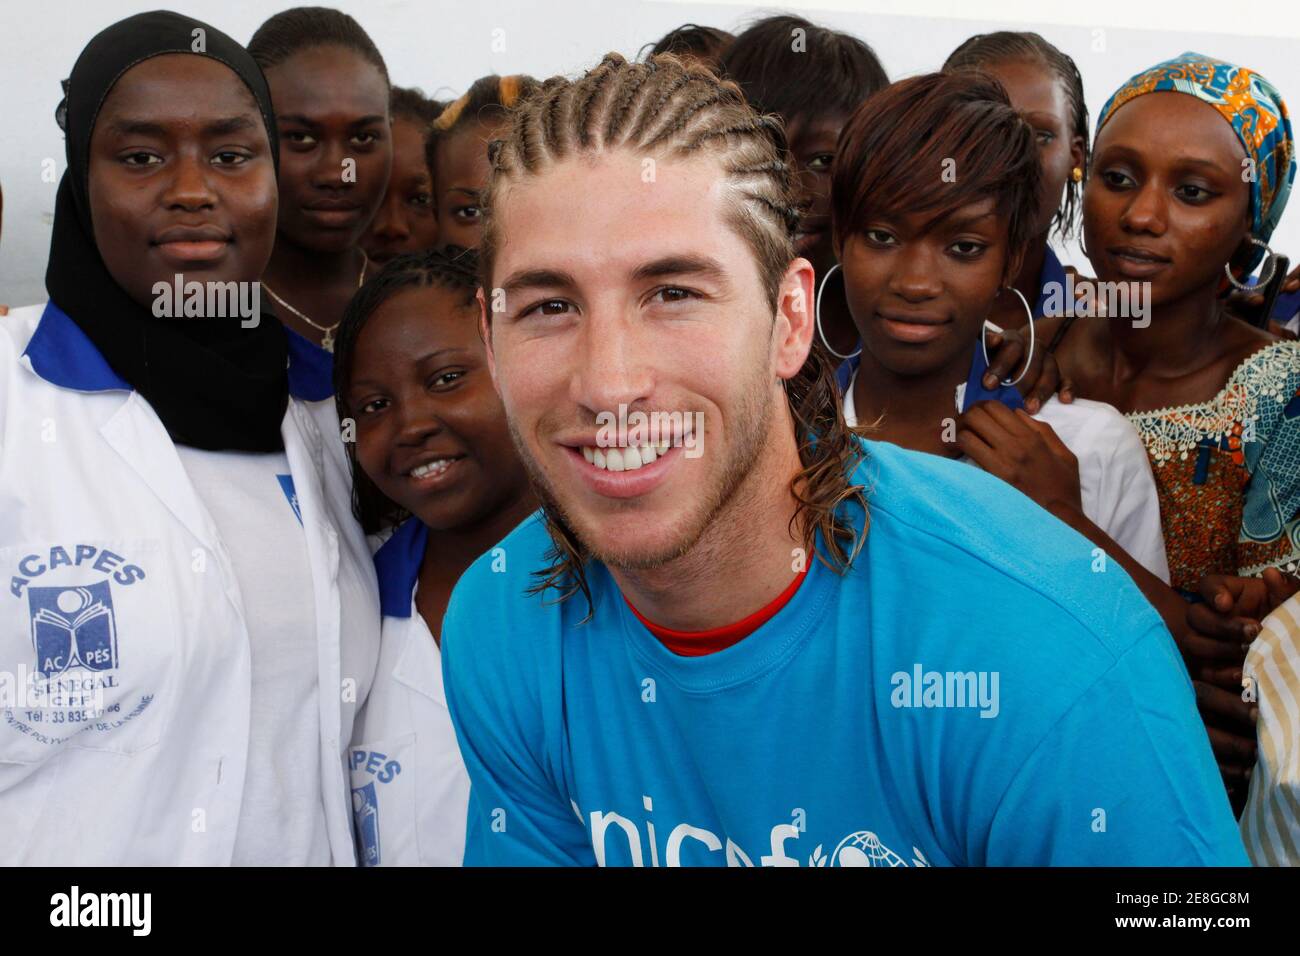 World Cup soccer champion and Real Madrid defender Sergio Ramos of Spain poses with Senegalese youth during his four-day visit to Dakar as a goodwill ambassador for UNICEF July 18, 2010. REUTERS/Emmanuel Braun (SENEGAL - Tags: SPORT SOCCER) Stock Photo